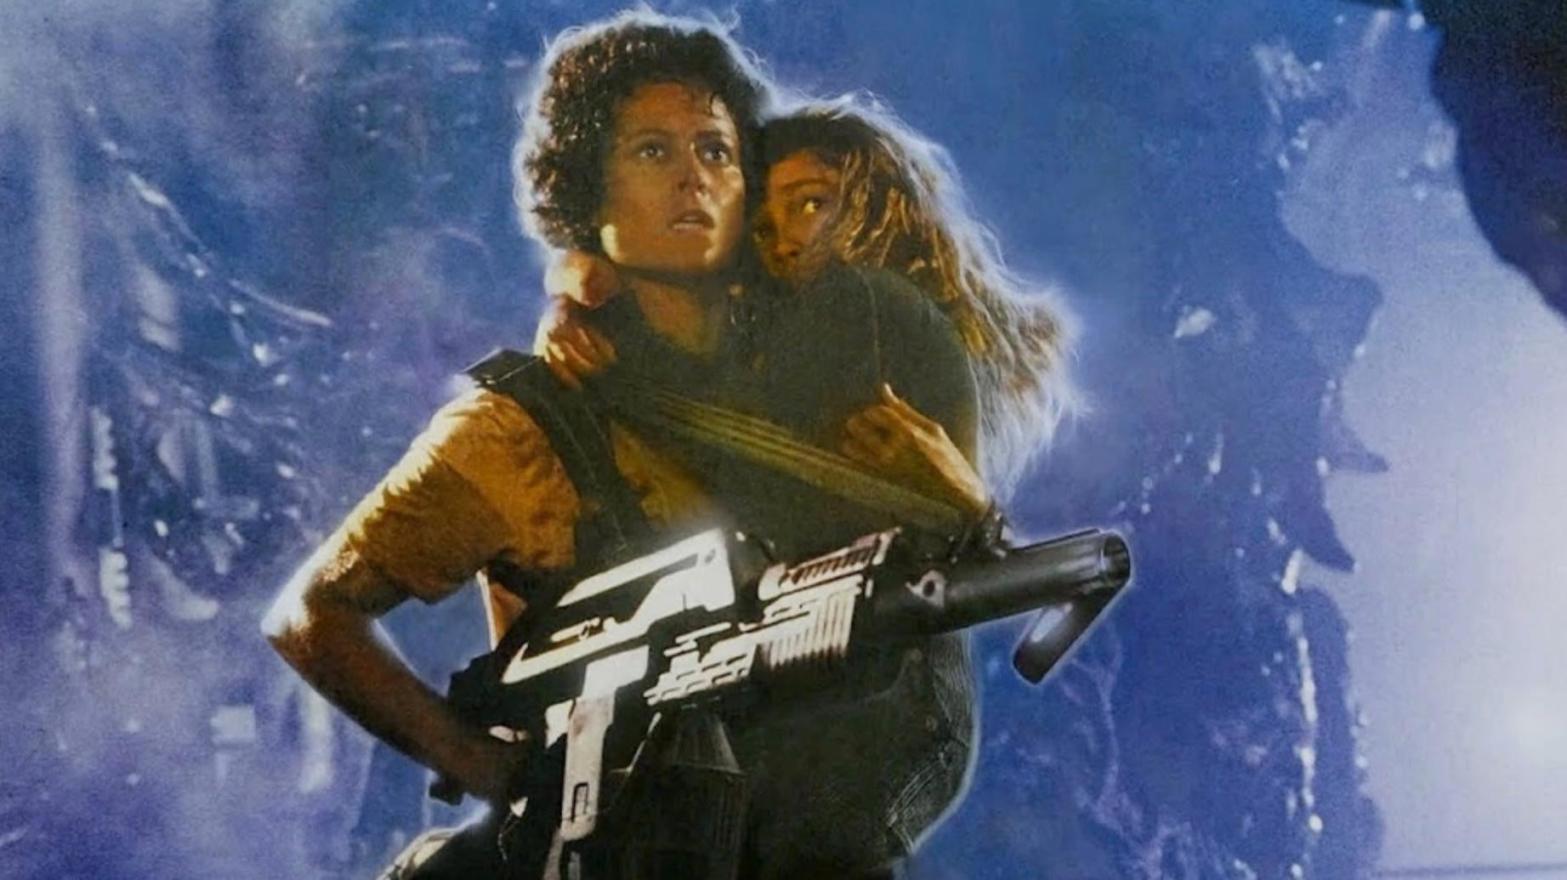 Most people think of this as the poster for Aliens, but it was not the first poster. Director James Cameron told us why. (Image: 20th Century Fox)